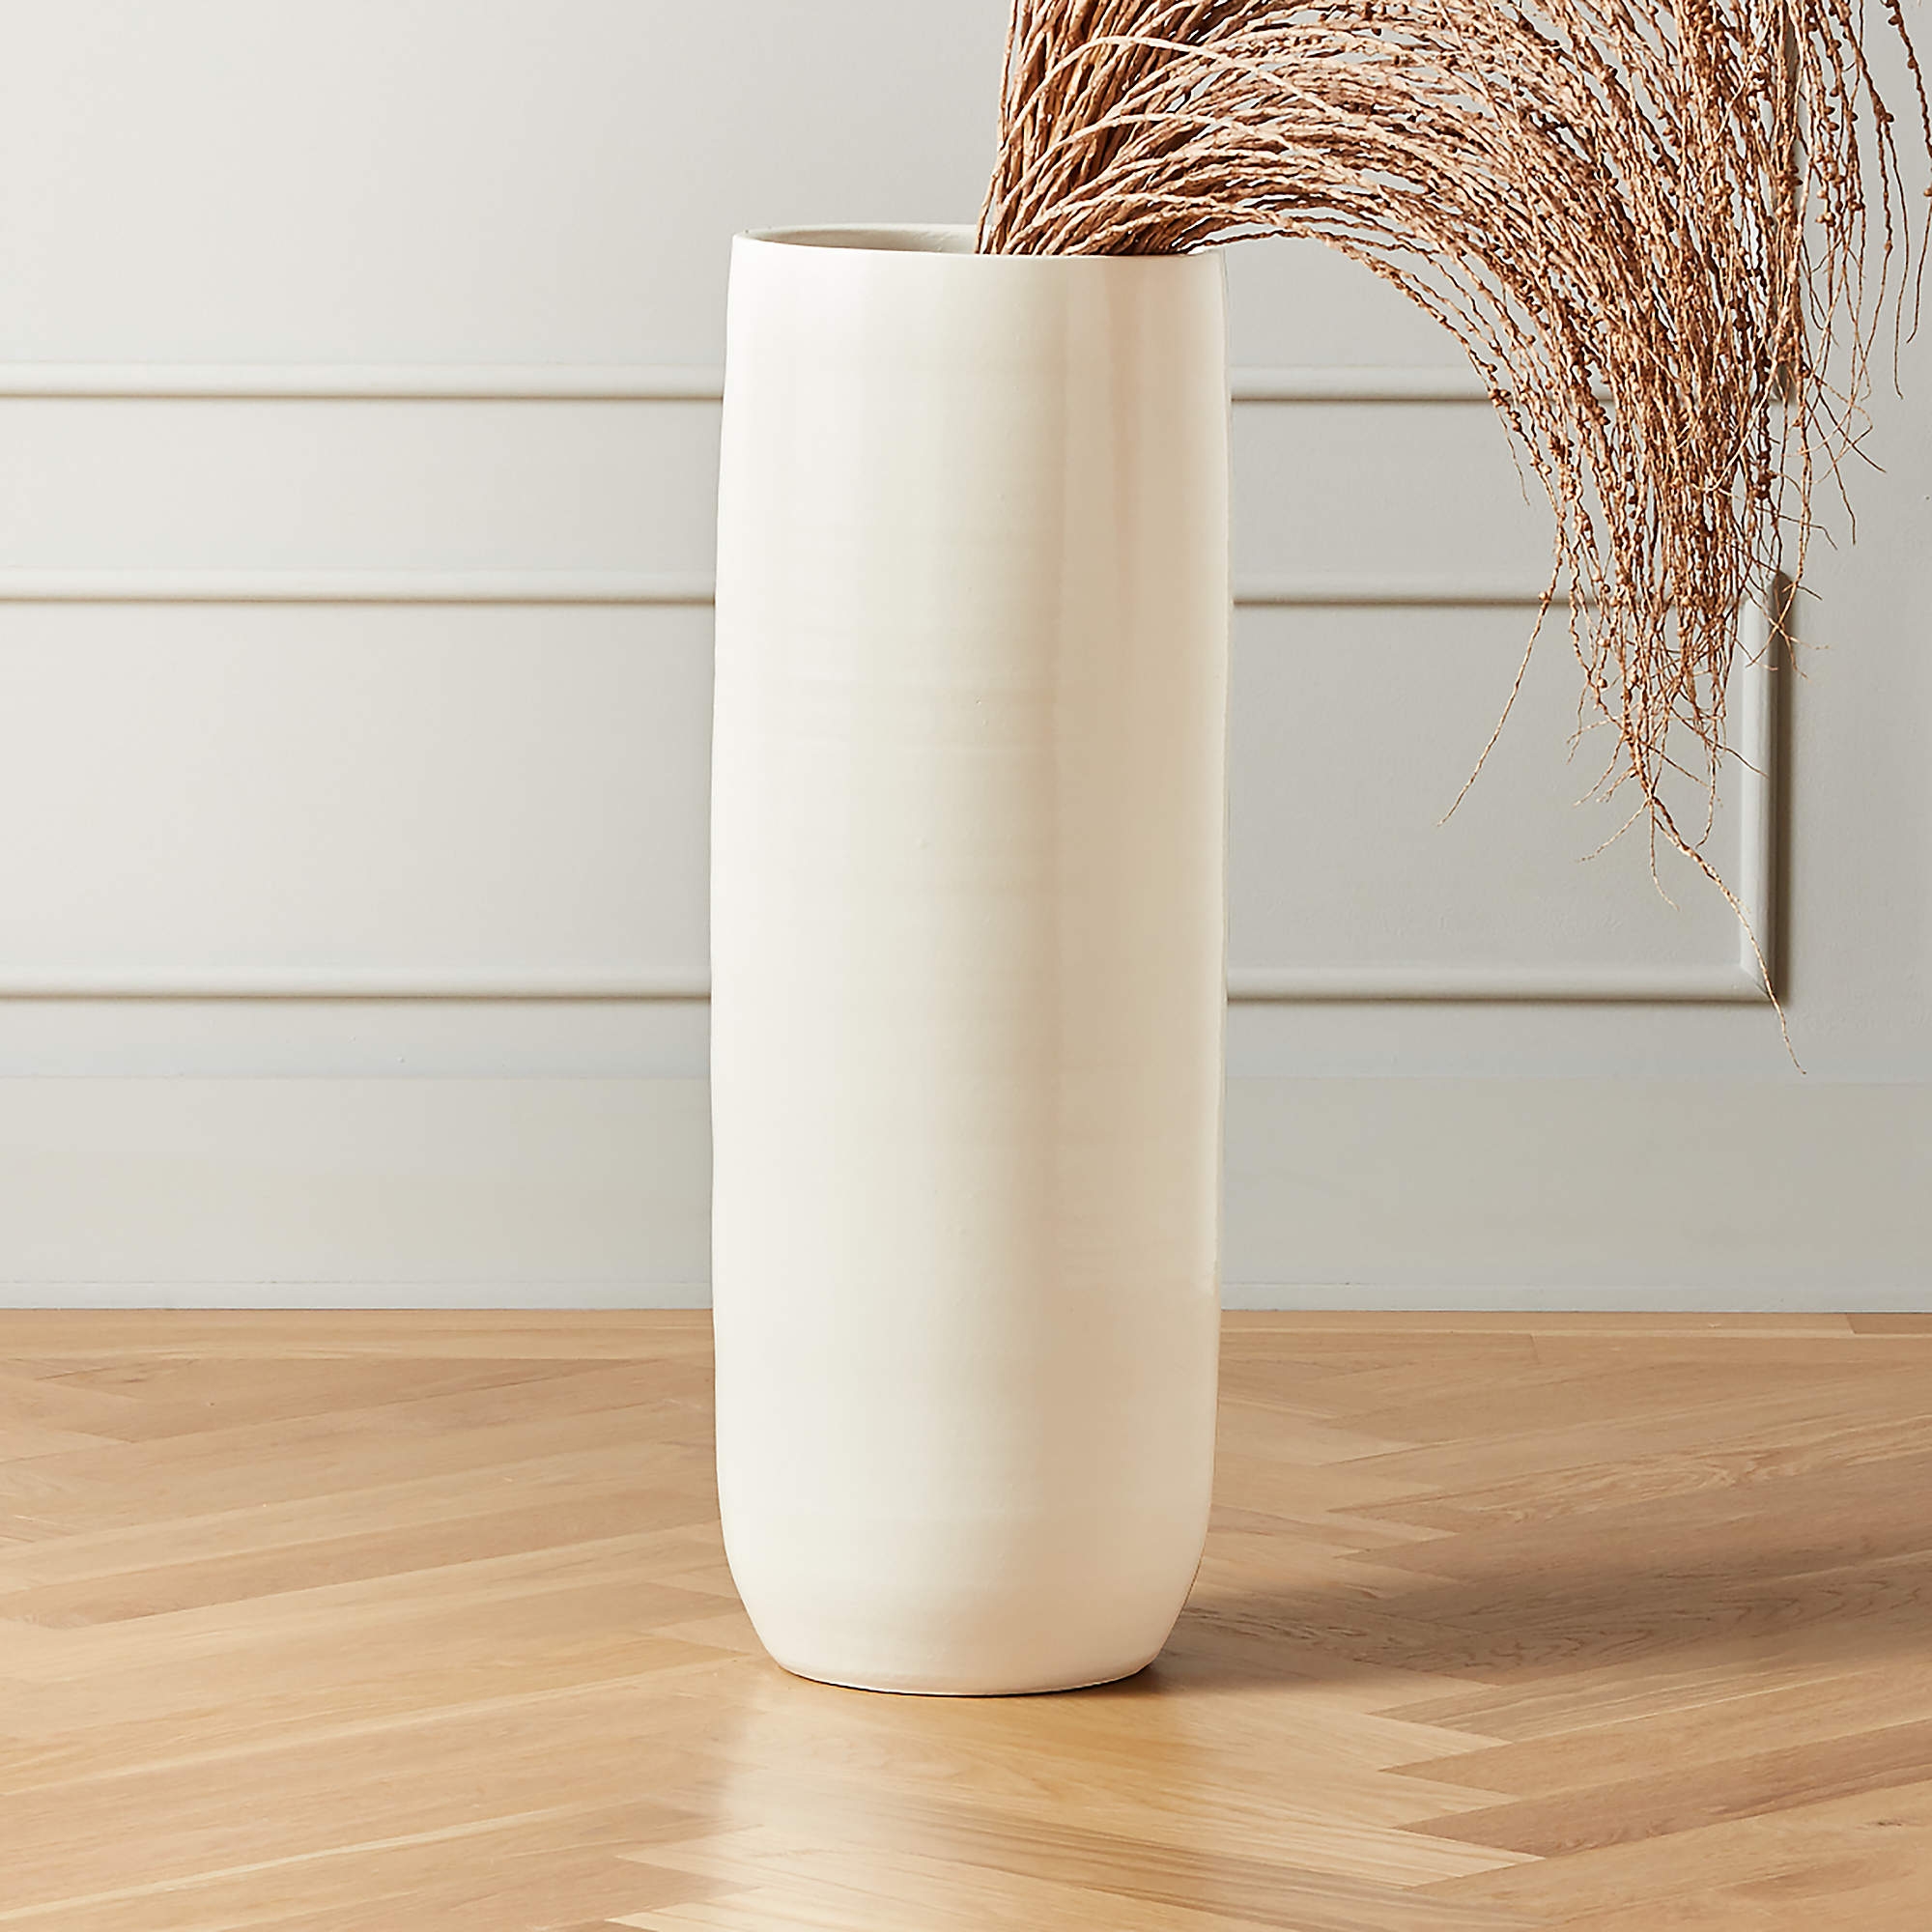 Rie Hand-Thrown Vase, White, Large - Image 1